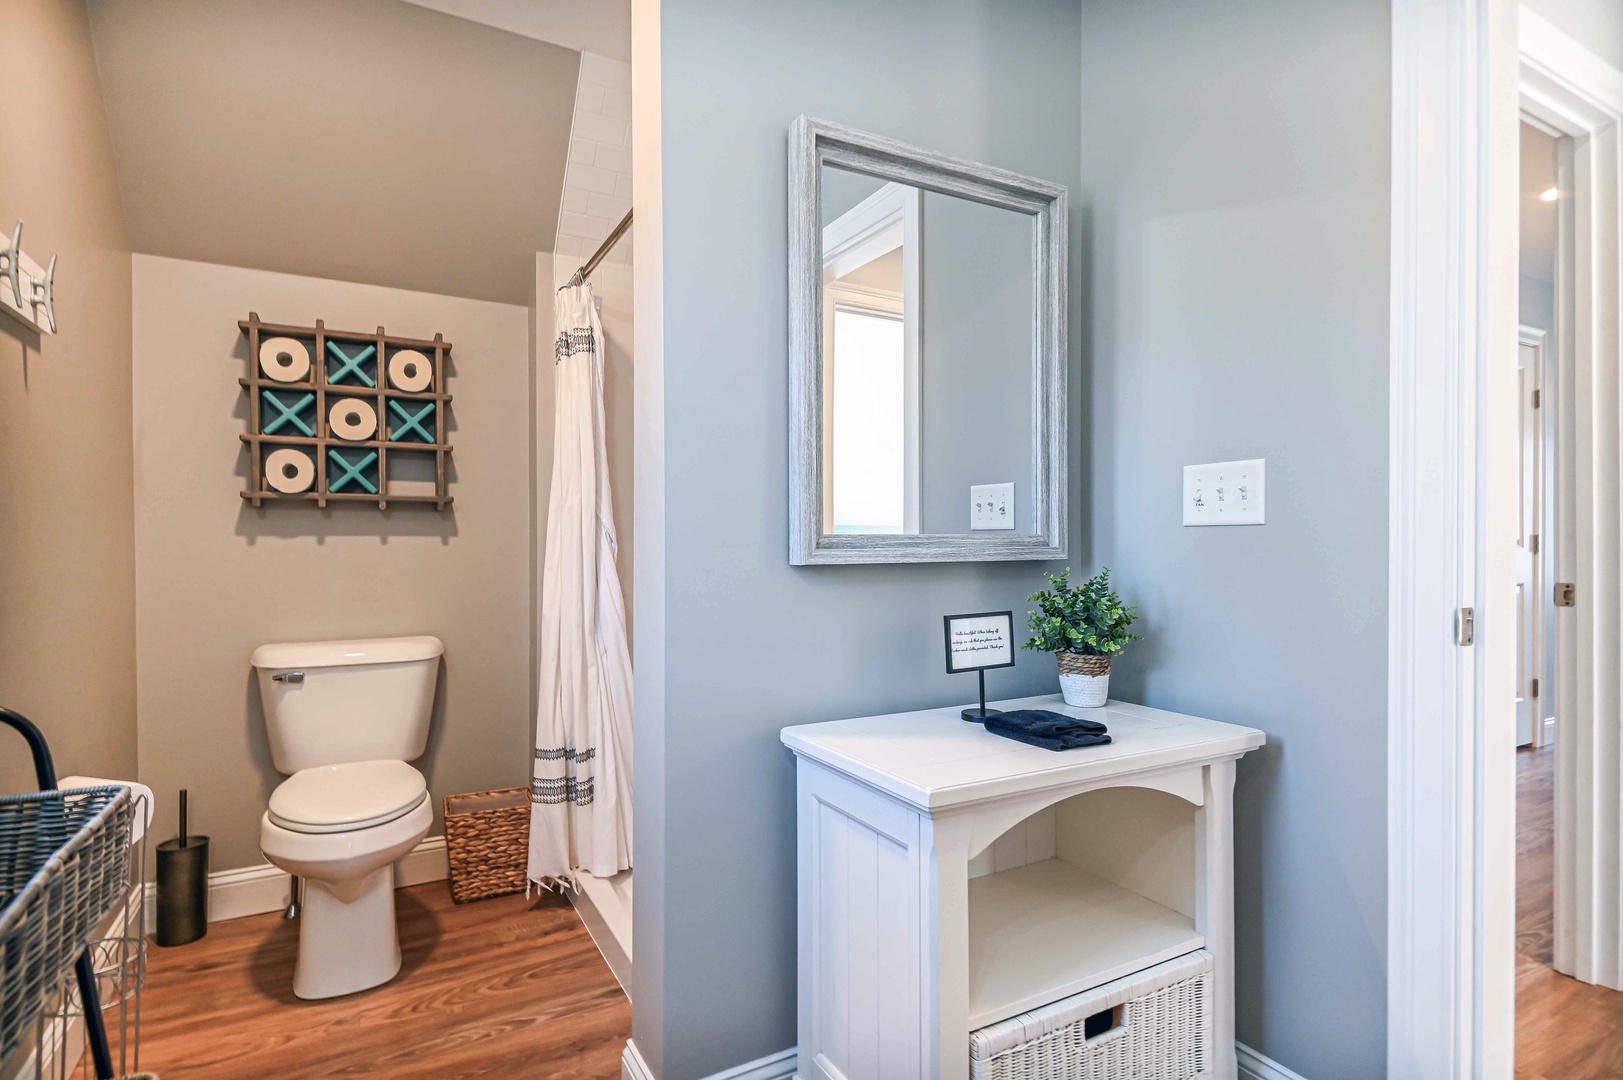 The upstairs full bath features a single vanity & walk-in shower